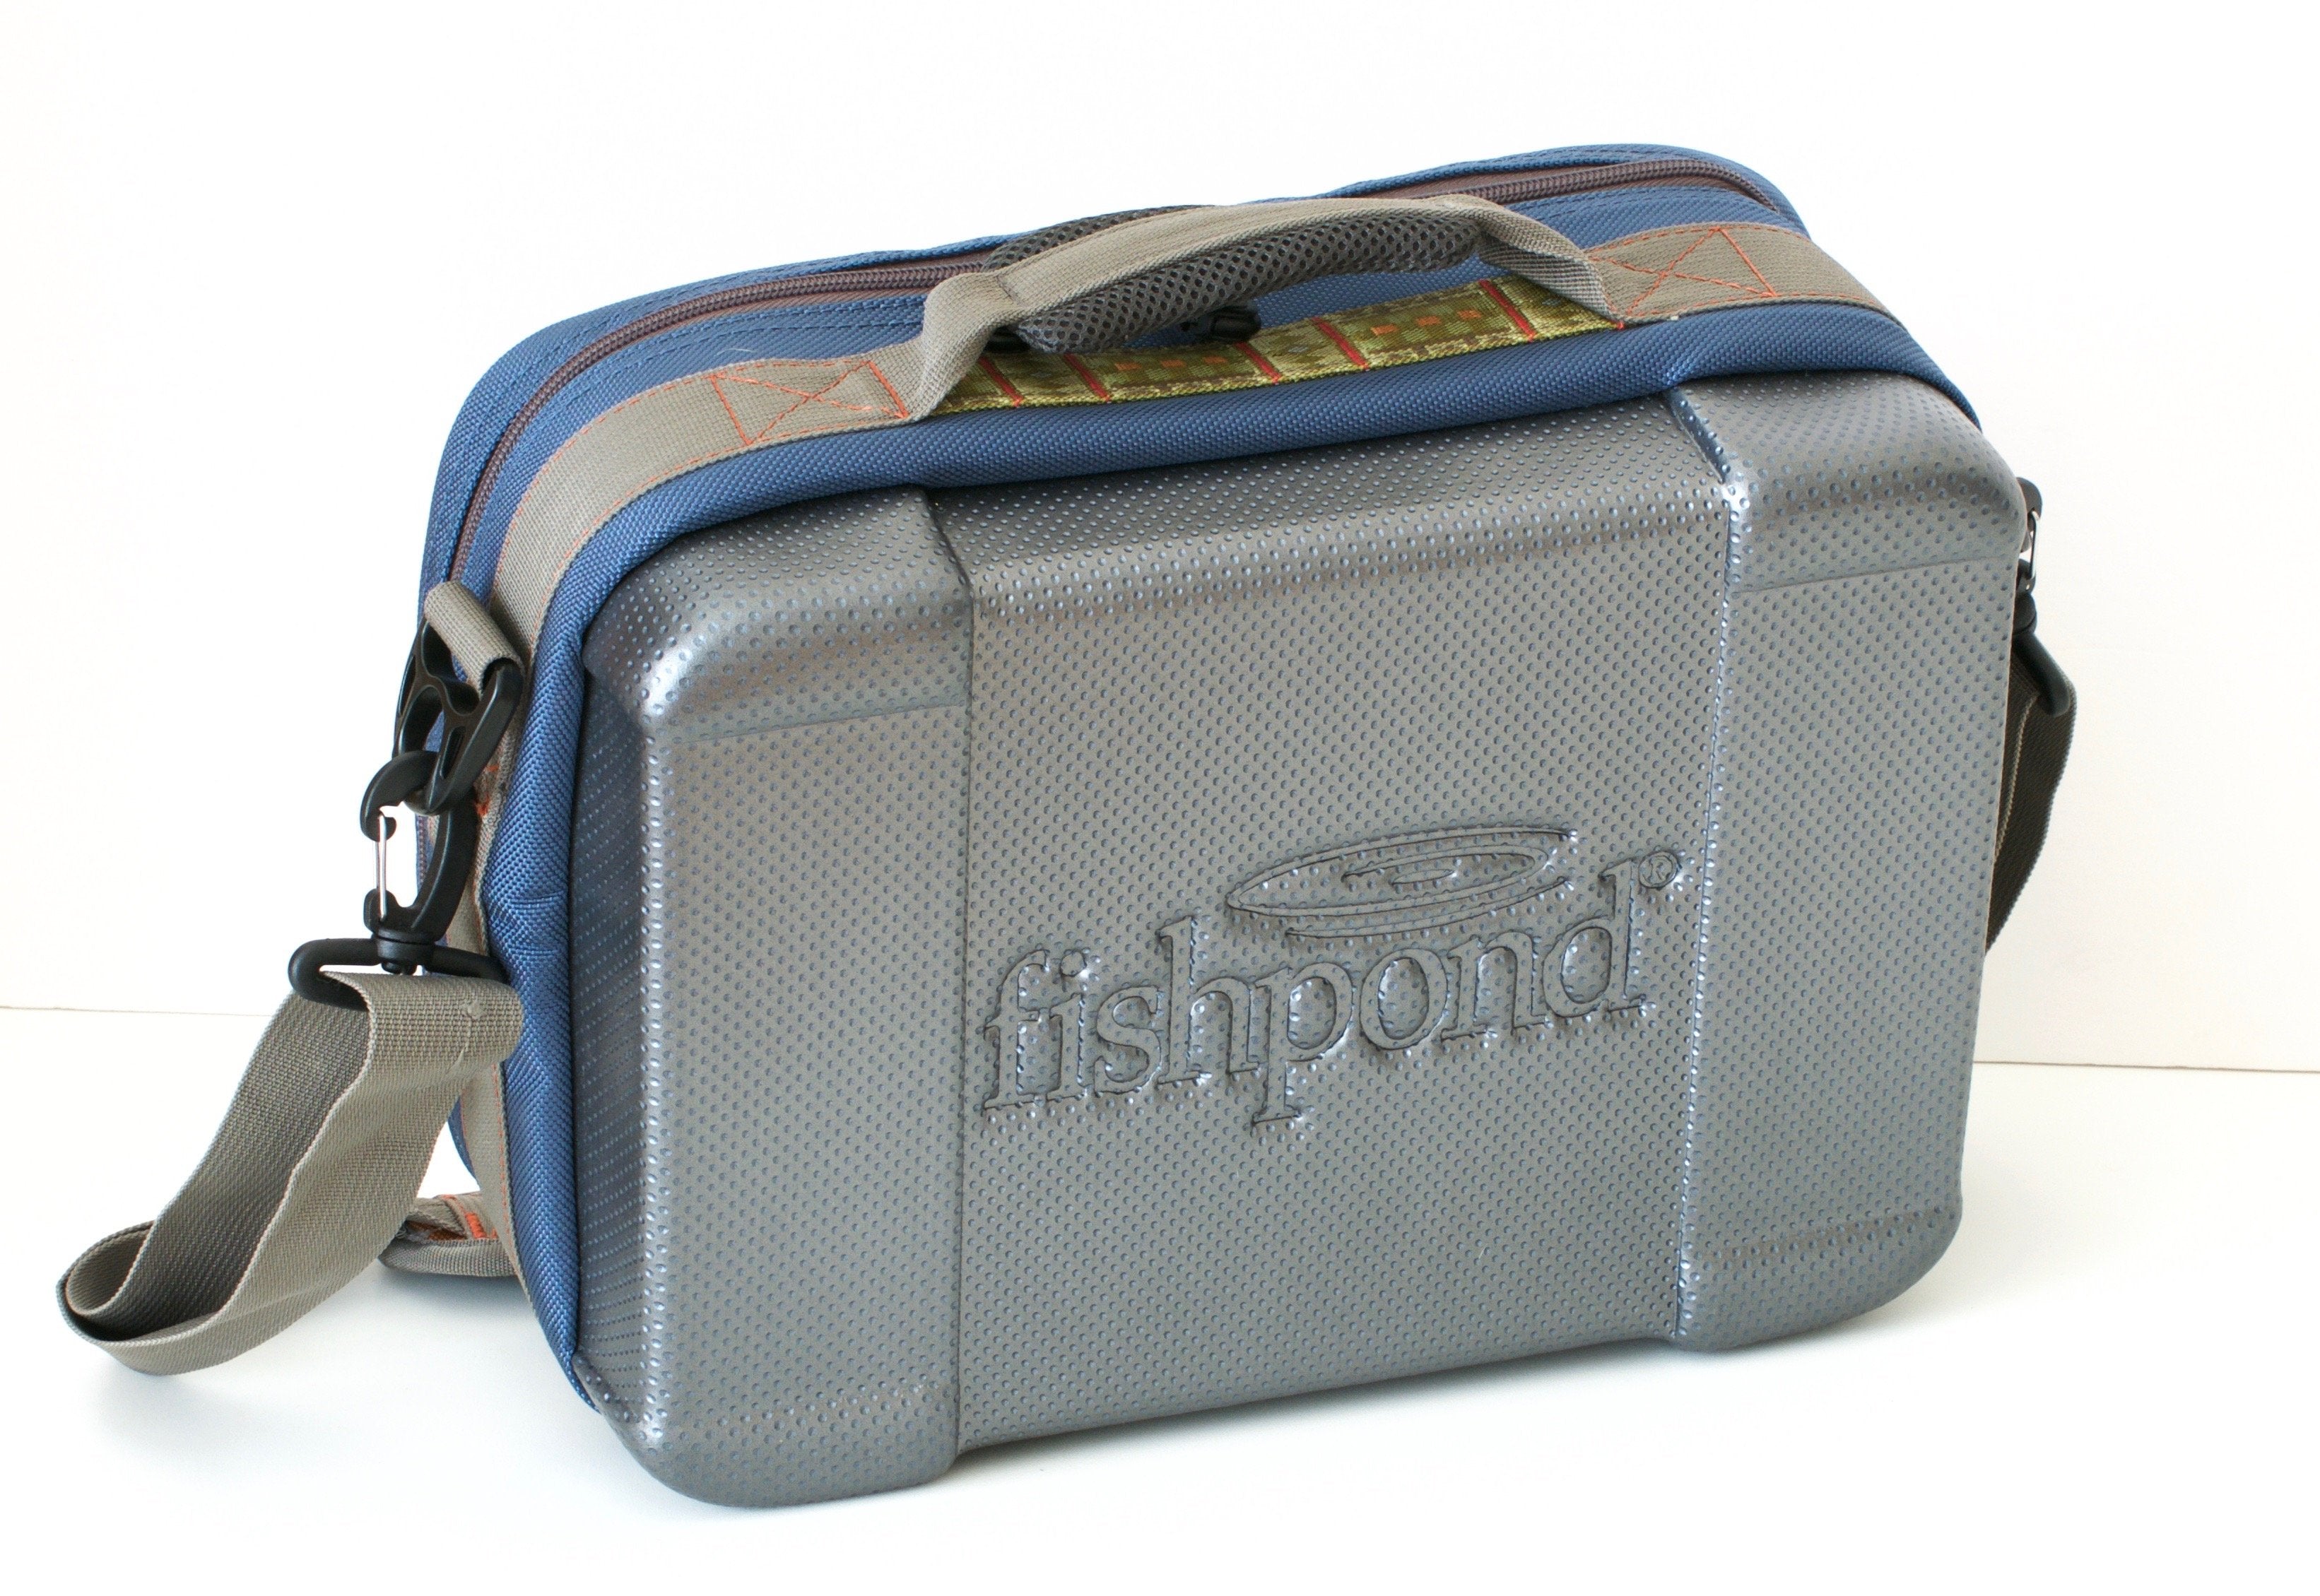 Fishpond - Sweetwater Reel Case - Spinoza Rod Company